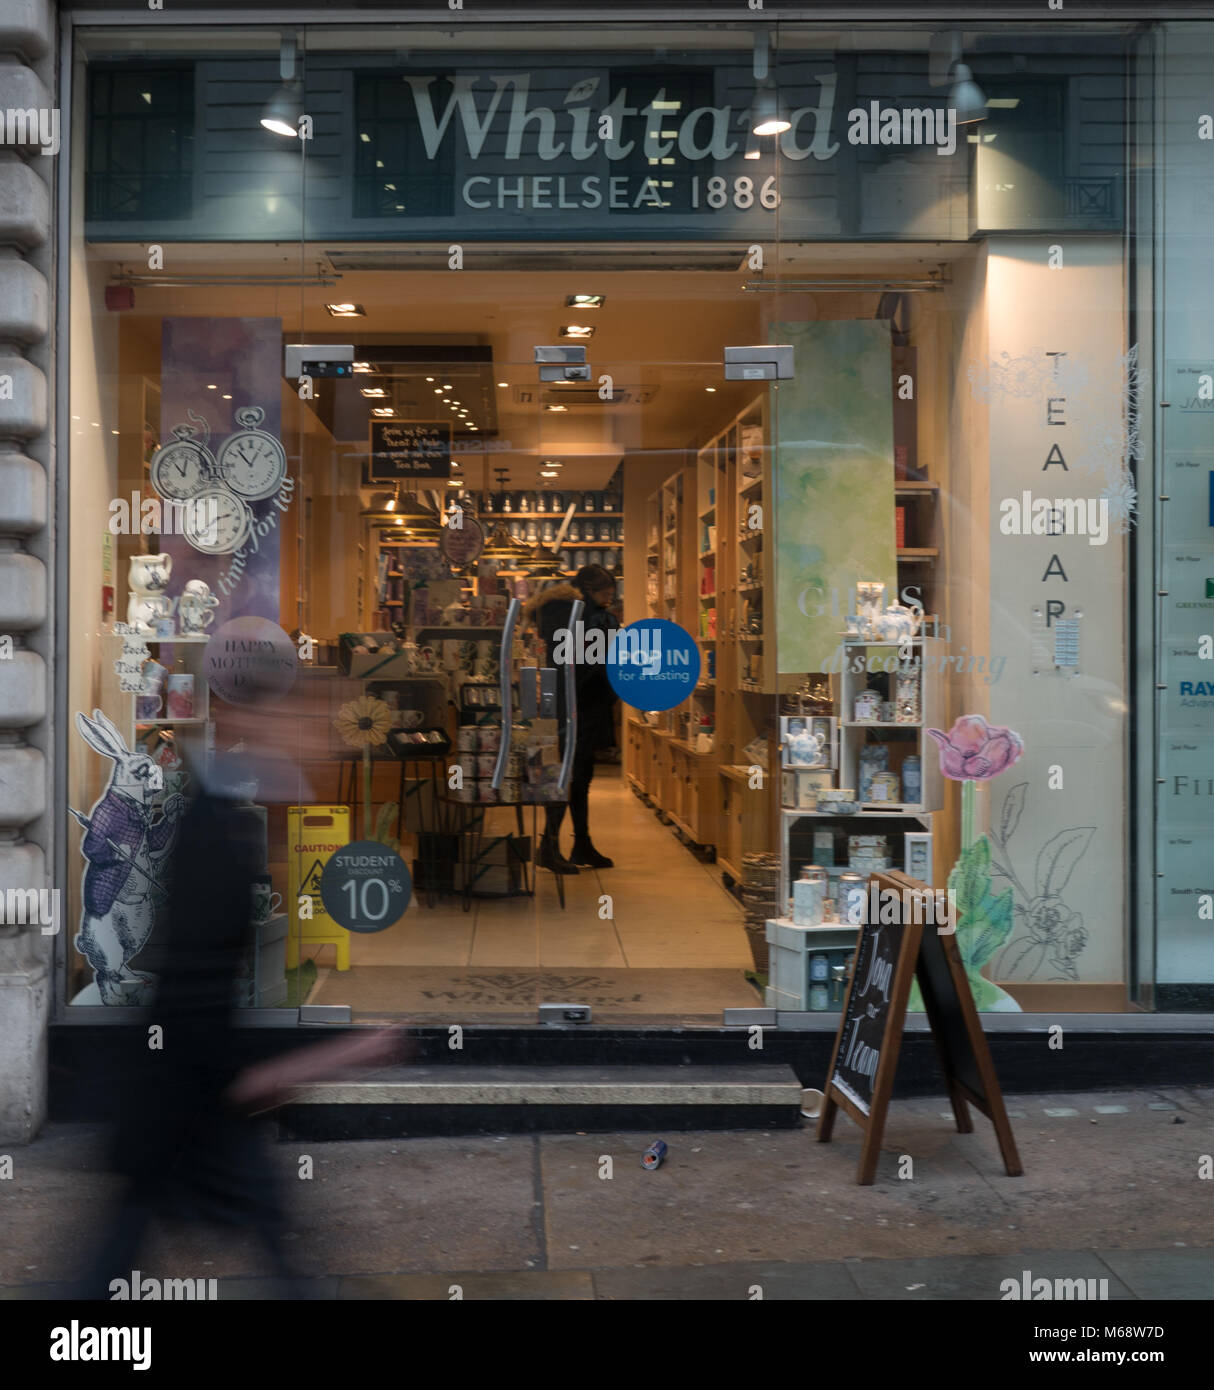 Following the news of two high street retailers going out of business, there are fears for others. A view of the Whittard retailer in Regents Street i Stock Photo